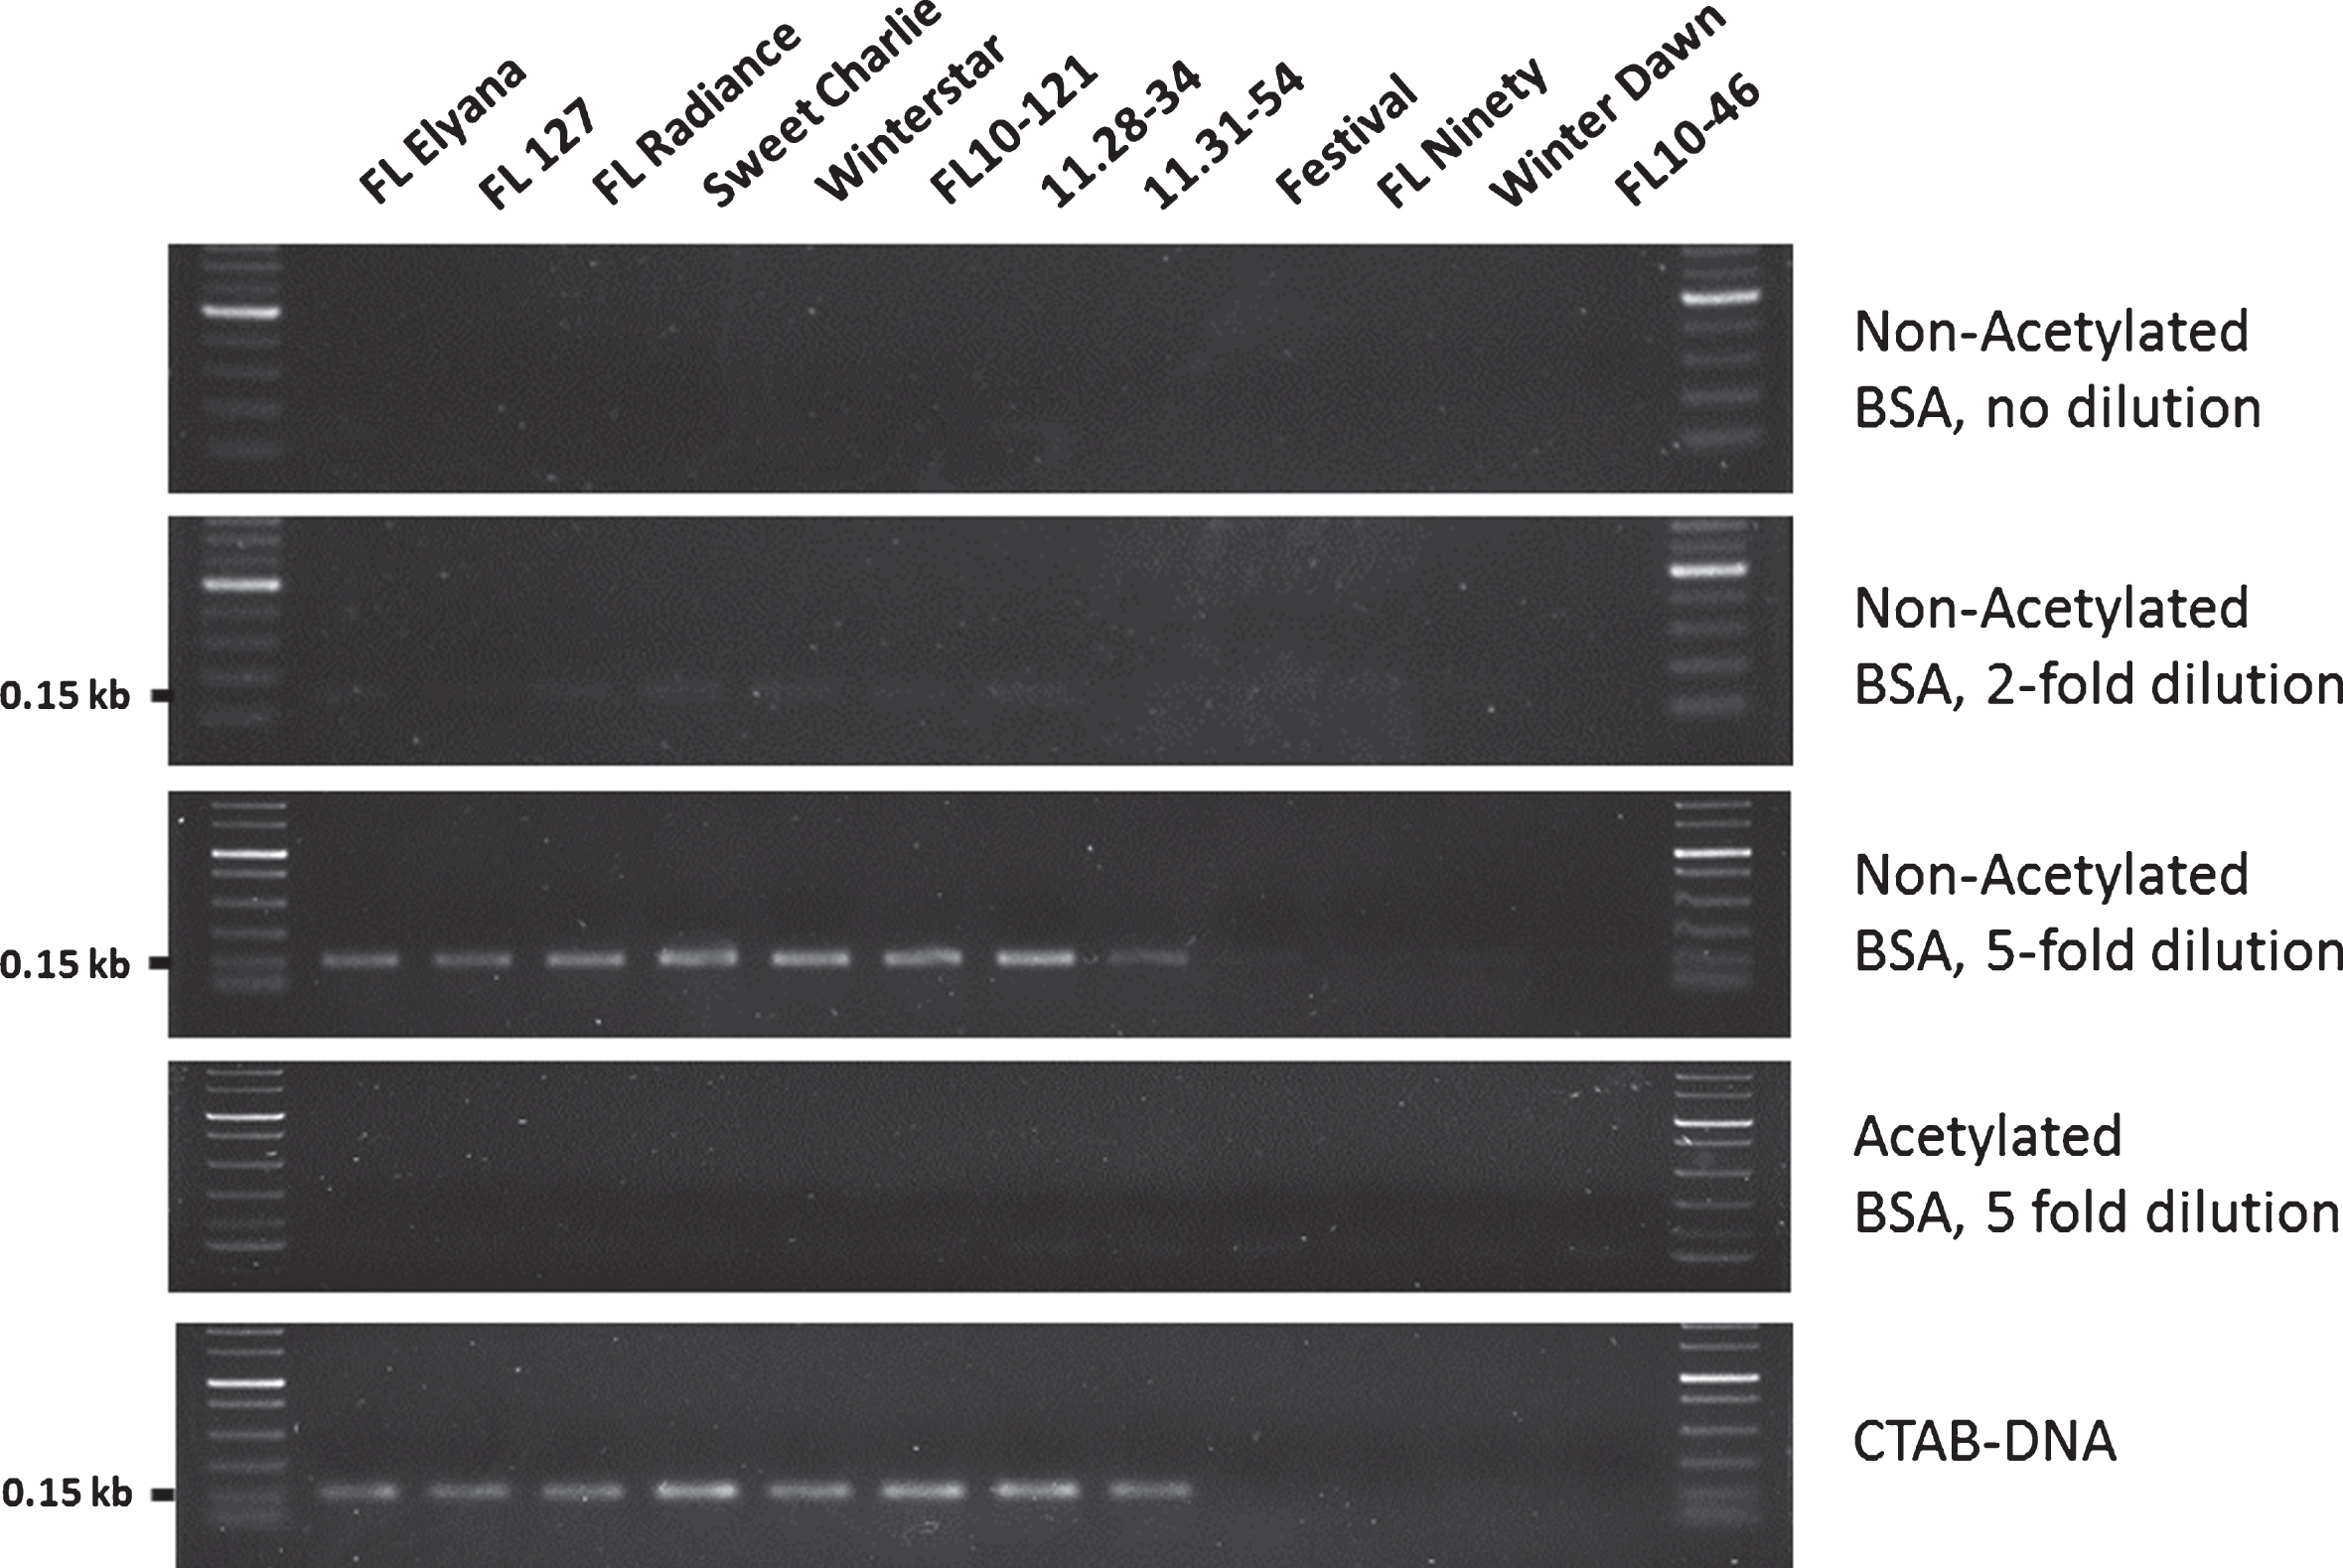 PCR amplification of FaFAD1 directly from strawberry leaf tissue. The eight cultivars and four advanced selections of strawberry (Fragaria×ananassa) were used in this study. Florida Elyana: FL Elyana, Sweet Sensation® ‘Florida 127’: FL 127, Florida Radiance: FL Radiance, Sweet Charlie, Winterstar™ ‘FL 05-107’: Winterstar, Strawberry Festival: Festival, Florida Ninety: FL Ninety, Winter Dawn, FL10-121, 11.28-34, 11.31-54 and FL10-46. Strawberry seedlings were grown in a greenhouse located at the UF/IFAS Gulf Coast Research and Education Center. CTAB-DNA samples were prepared as previously described [24]. Crude DNA extractions from leaf tissues followed a well-described NaOH-based method [14]. An amplified fragment of expected size (∼150 bp) was observed in eight accessions producing γ-decalactone for CTAB-DNA and for crude extractions after 5-fold dilution. Weak amplifications of FaFAD1 were found in all γ-decalactone producing accessions after 2-fold dilution. Acetylated or non-acetylated BSA was added to the PCR reactions using crude extracts. All experiments were repeated at least three times, and PCR amplicons were confirmed by gel electrophoresis at 230 V for 70 min using 1.5% agarose gels.